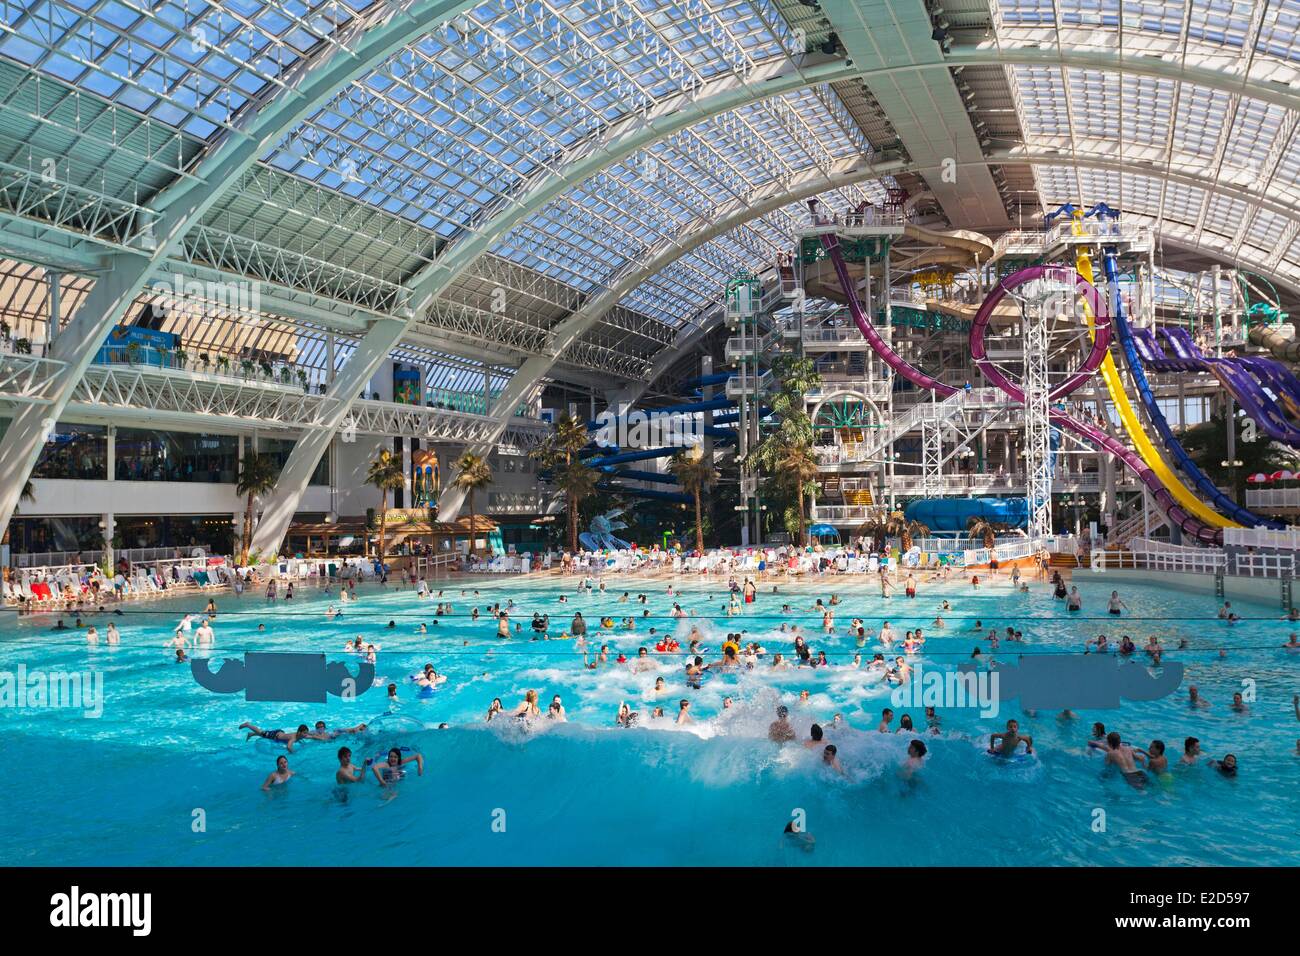 Canada Alberta Edmonton West Edmonton Mall the largest shopping mall in Canada World Waterpark largest indoor waterpark in the Stock Photo